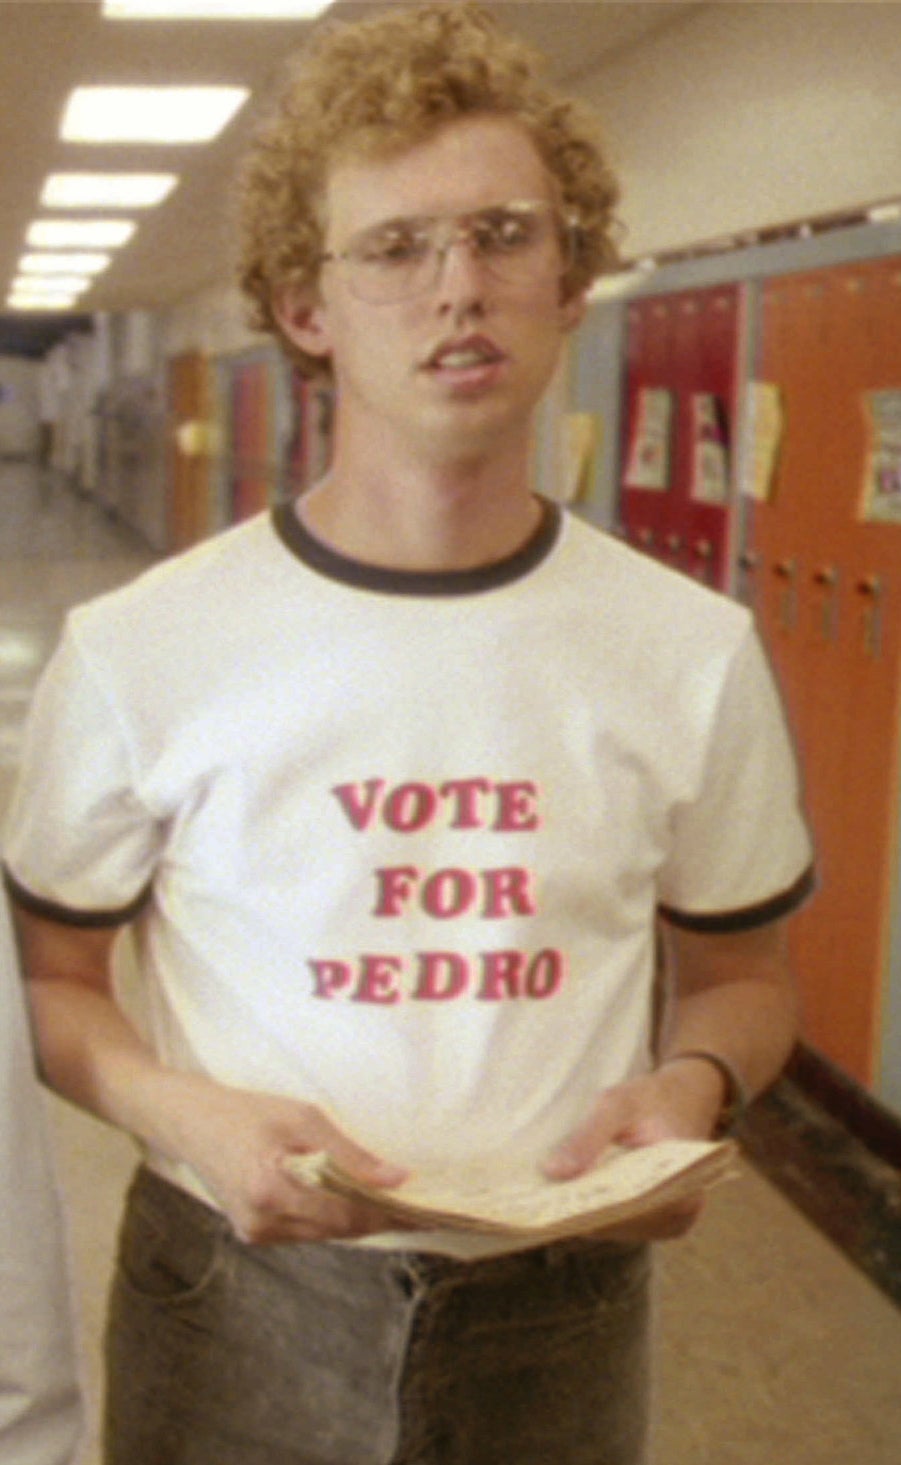 Napoleon Dynamite walks down the hall wearing his Vote for Pedro shirt